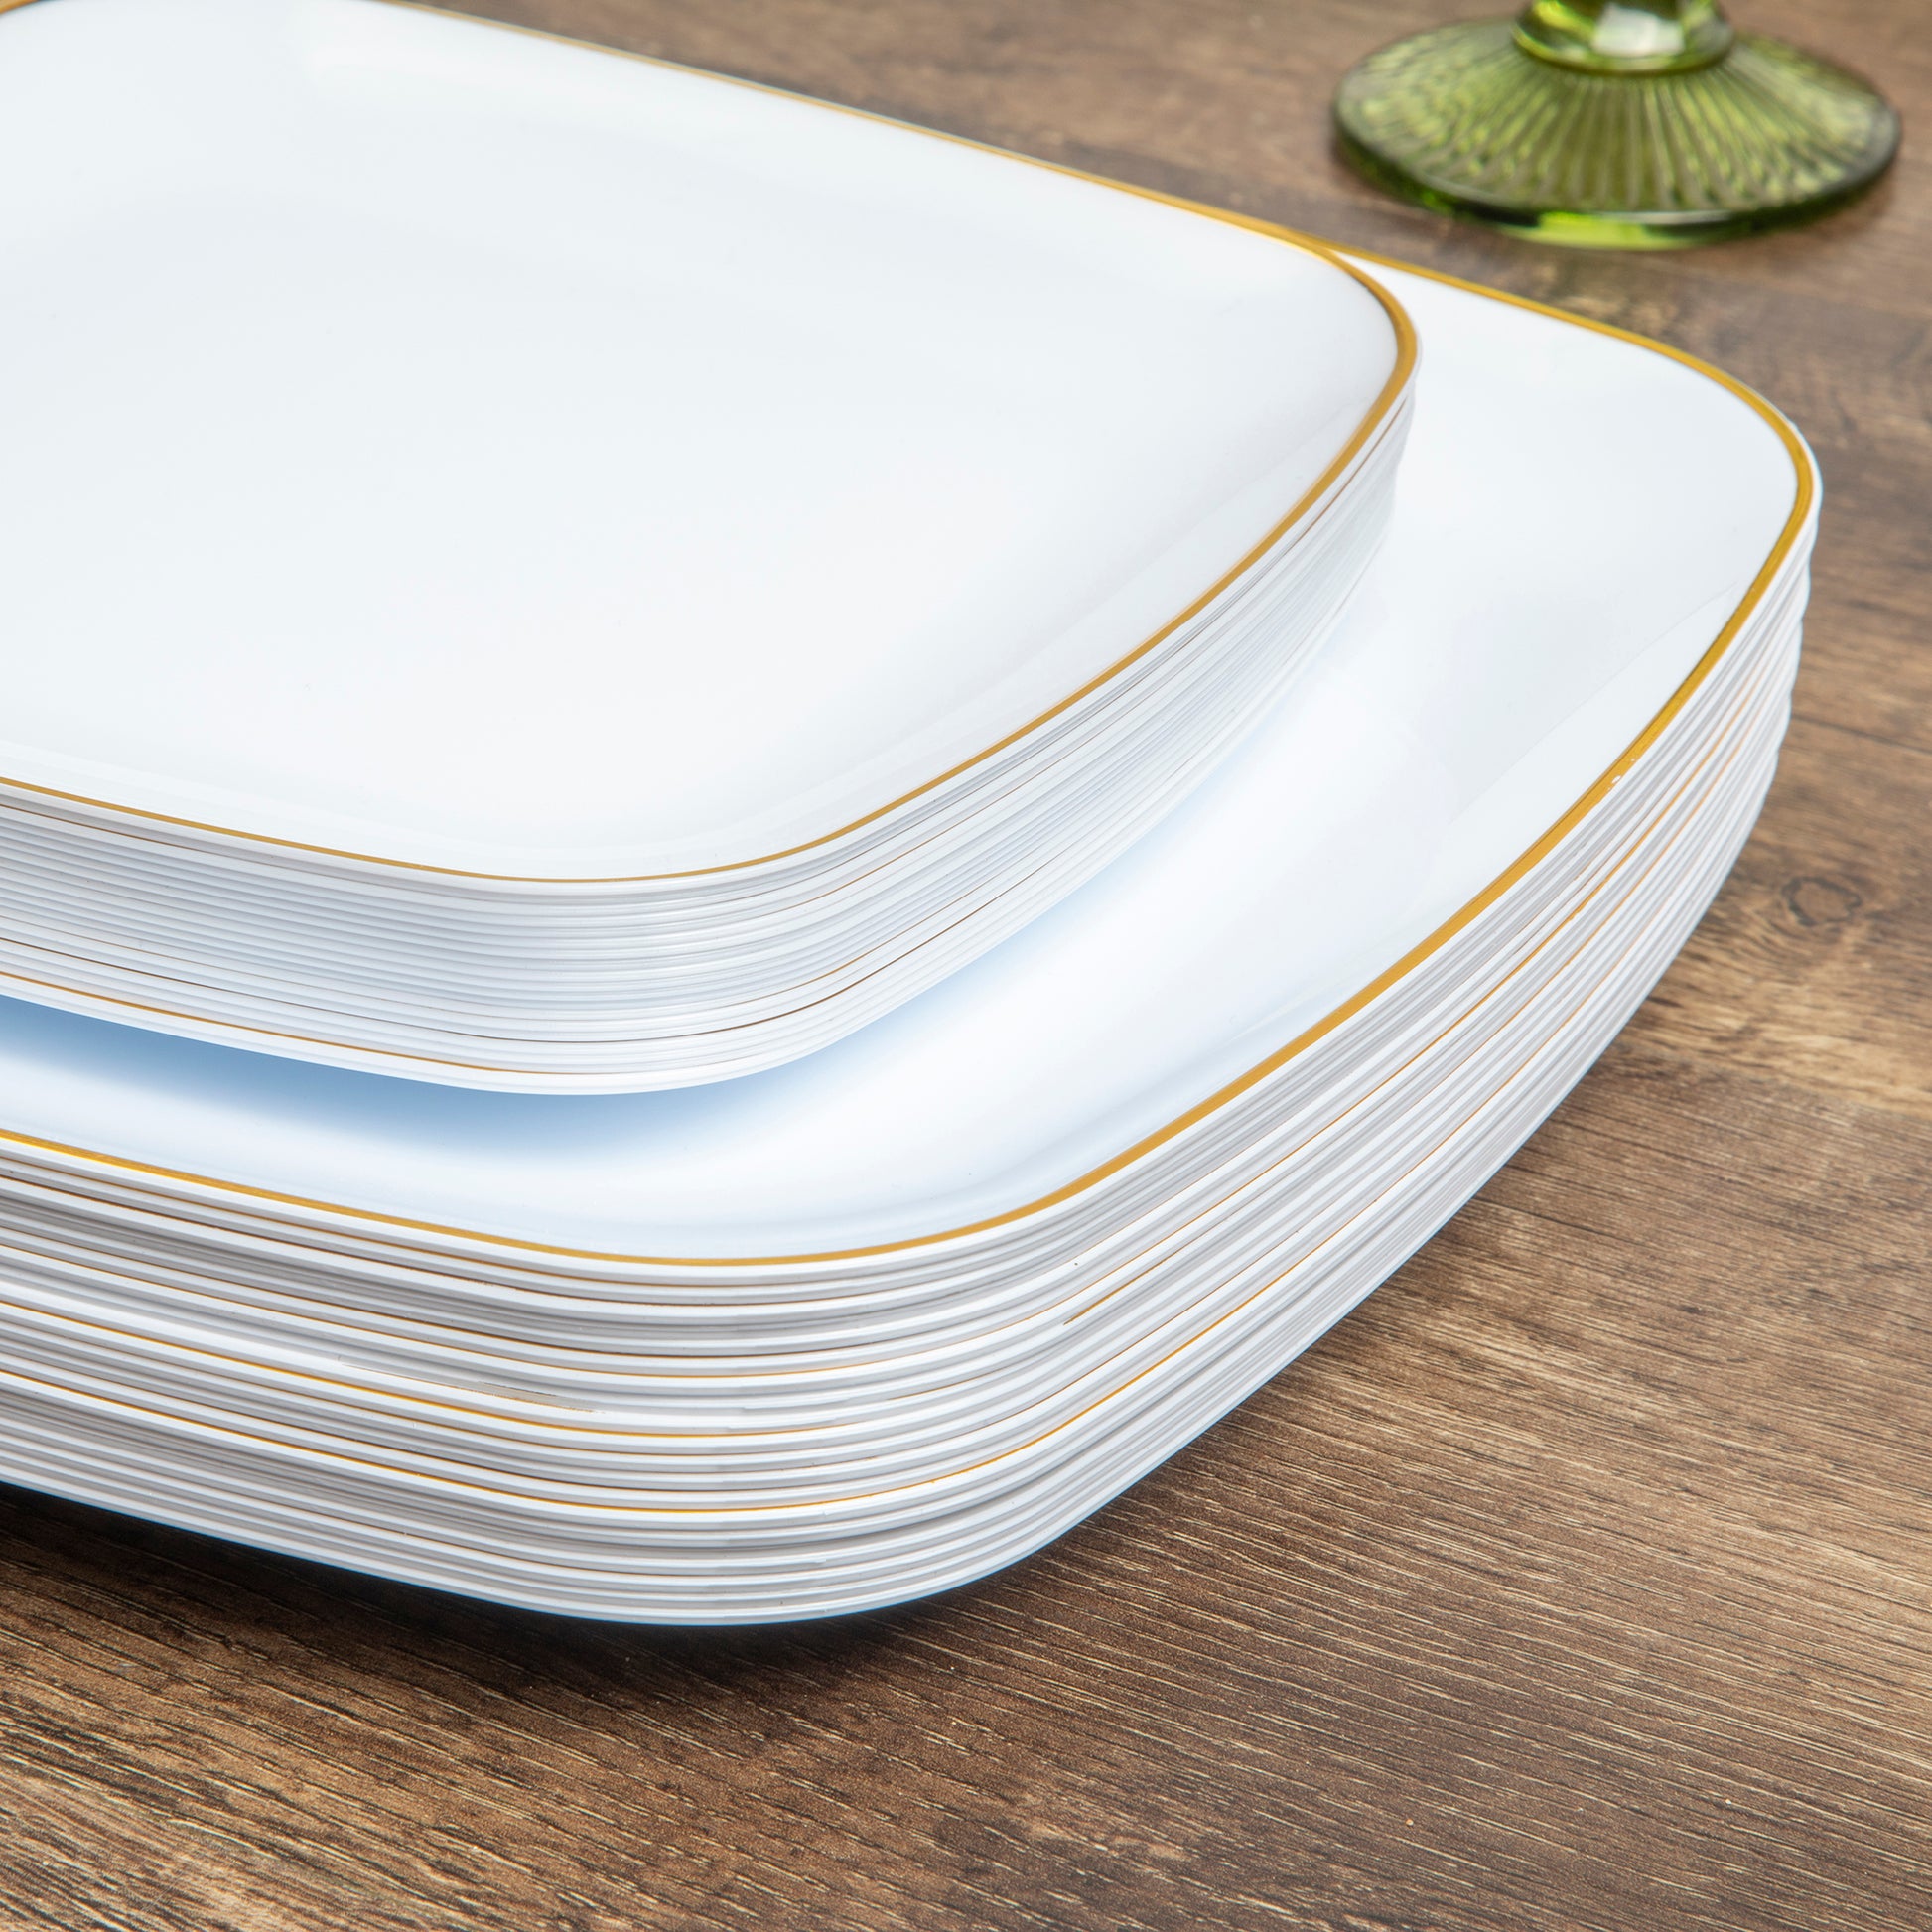 Square Modern Disposable Plastic Plates 40 Pcs Combo Pack White Gold Trimmed2 ?v=1664225697&width=1946